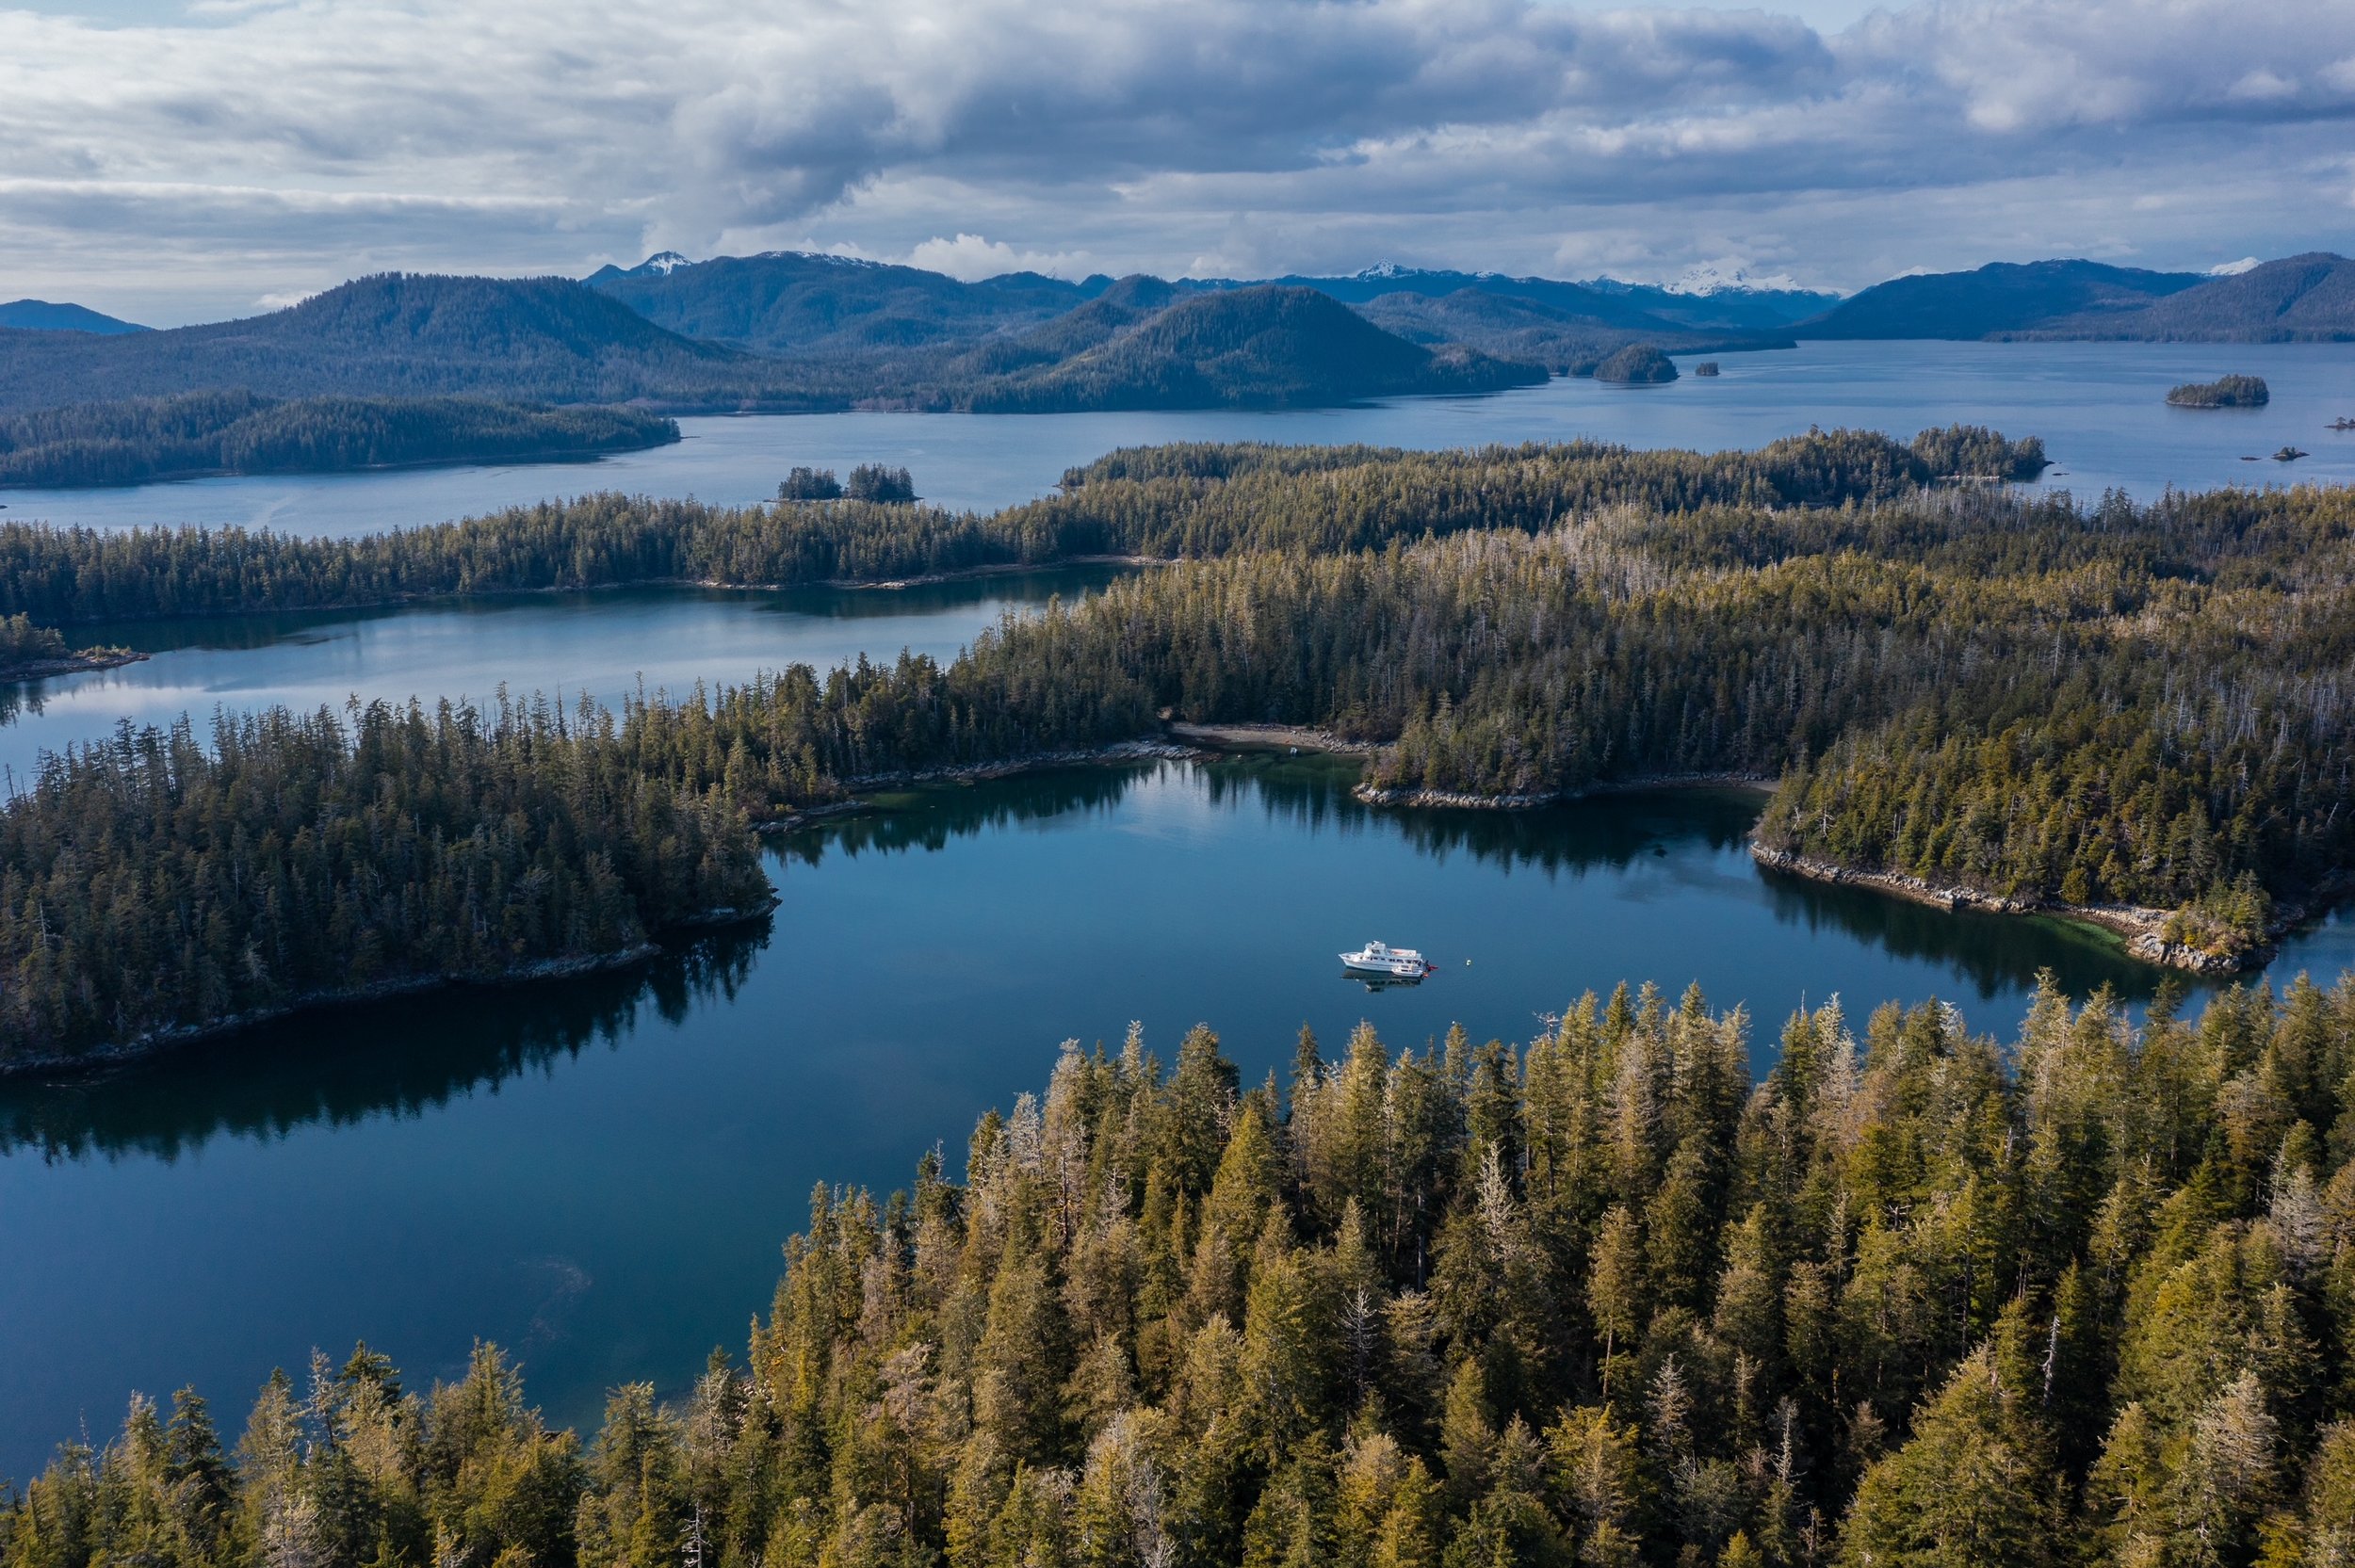 Aerial view of the Silver Lady anchored in a cove with views of ocean and forested islands all around.